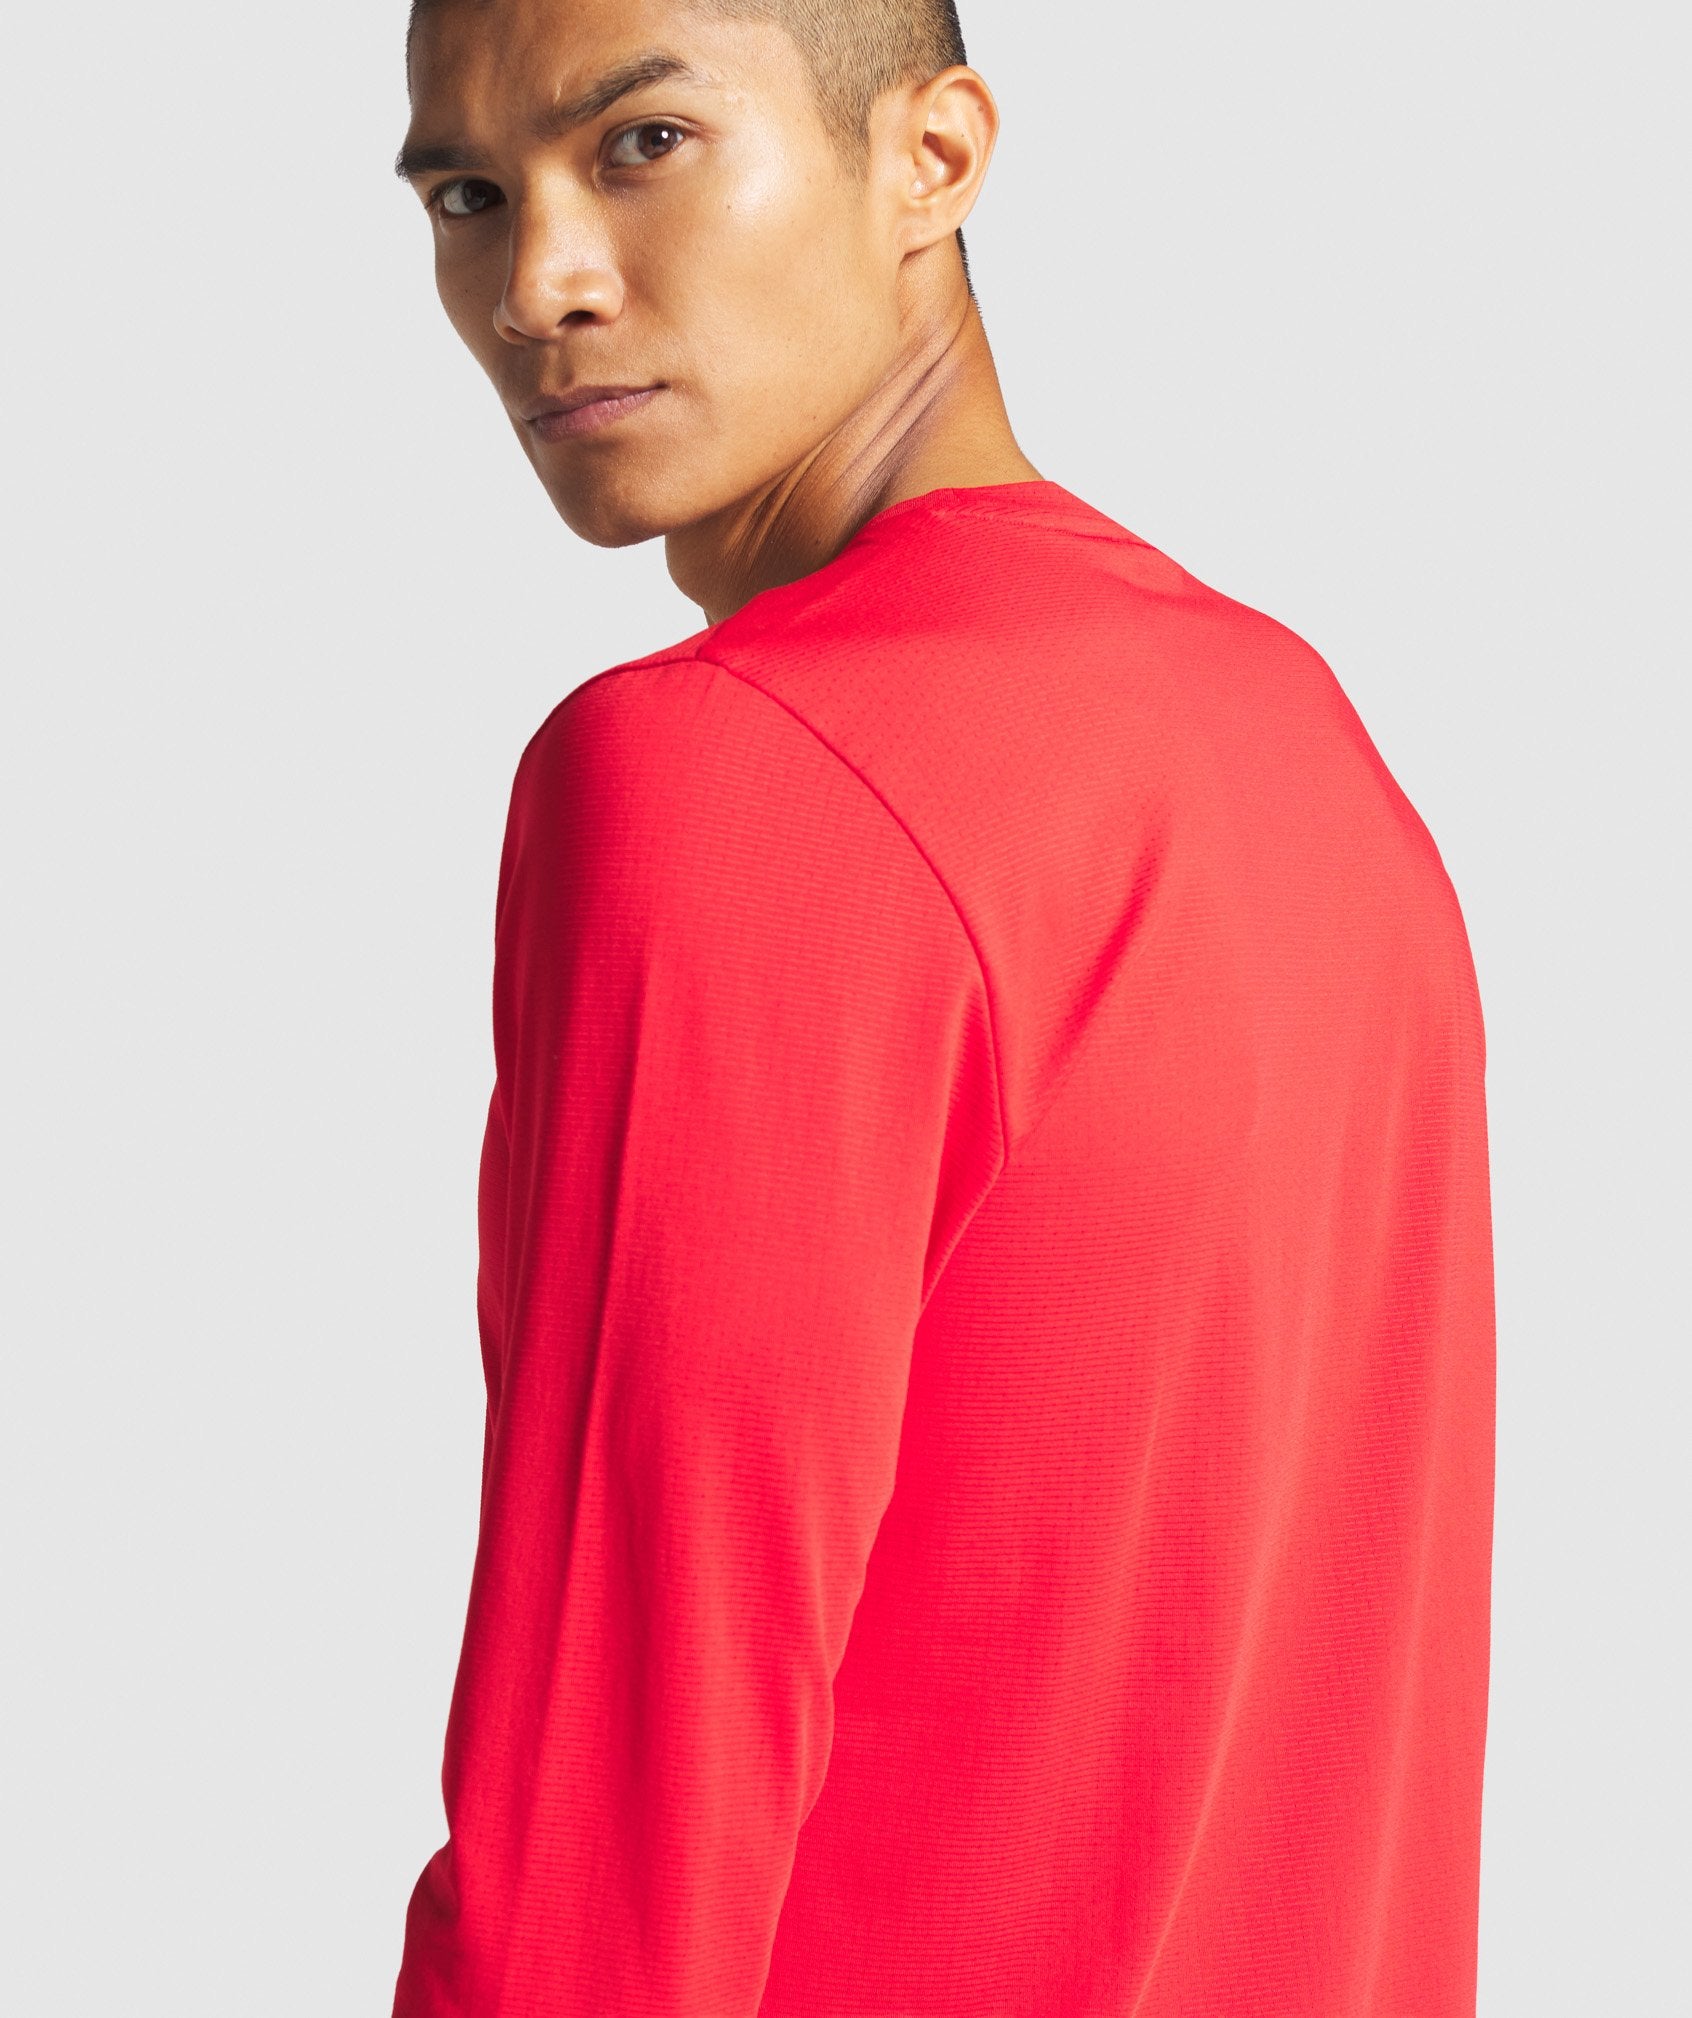 Arrival Long Sleeve T-Shirt in Red